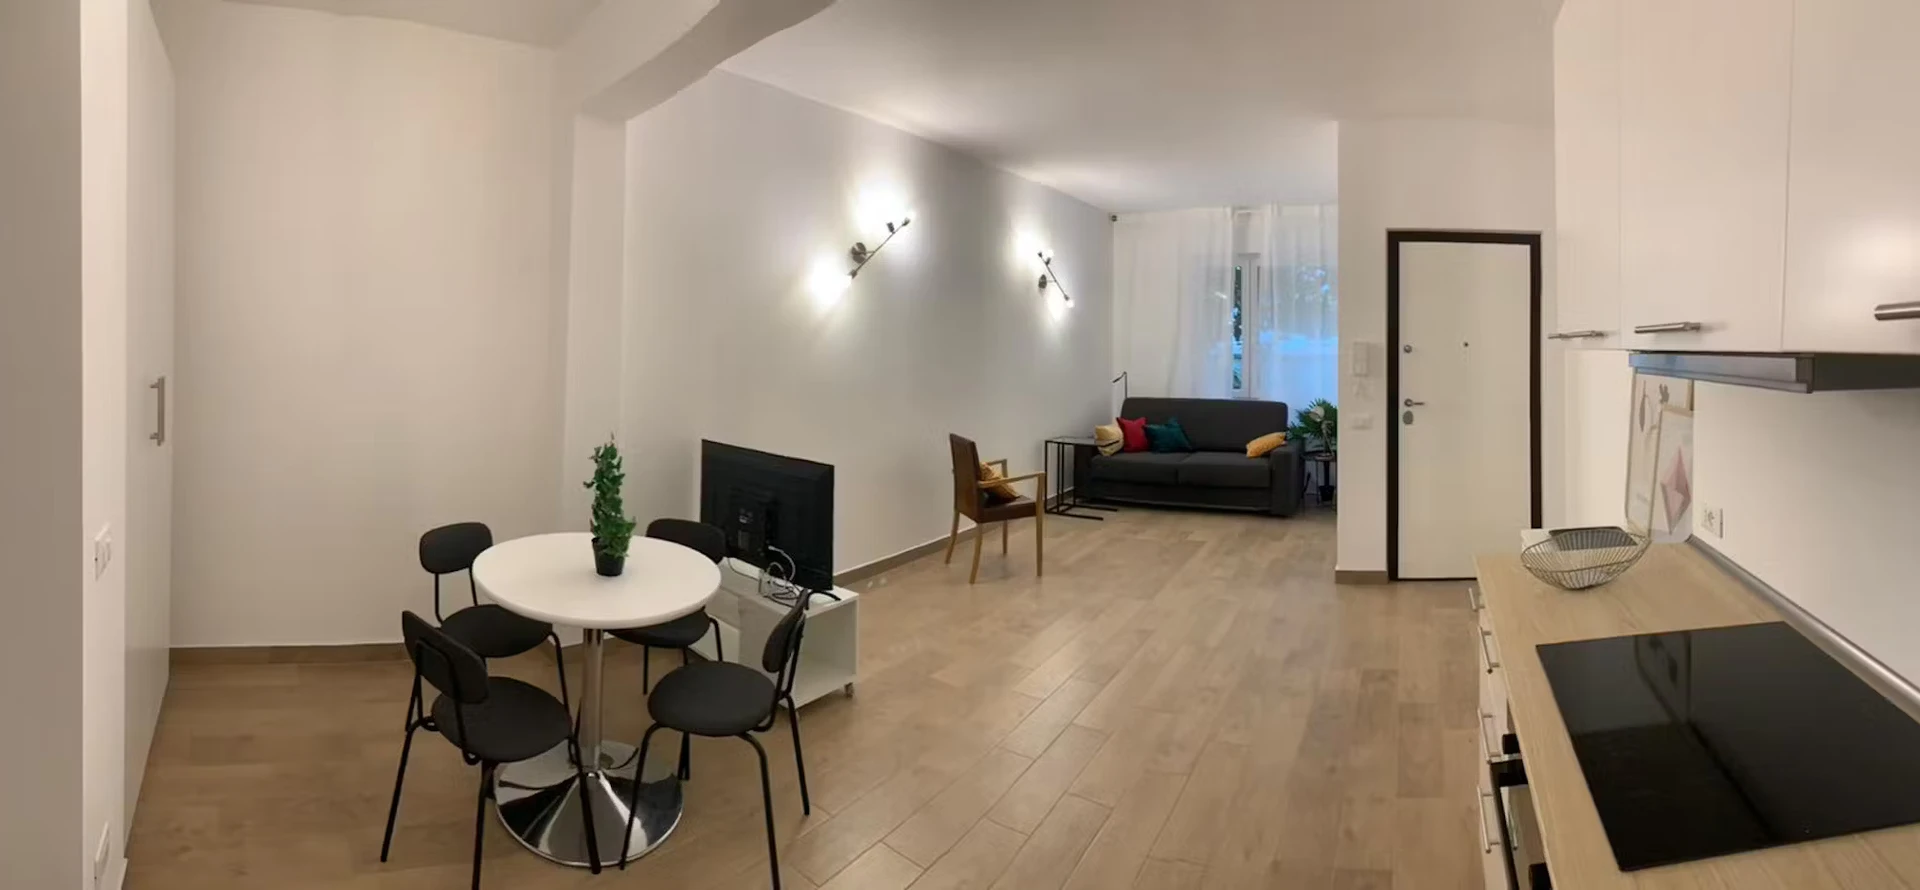 Accommodation in the centre of Udine